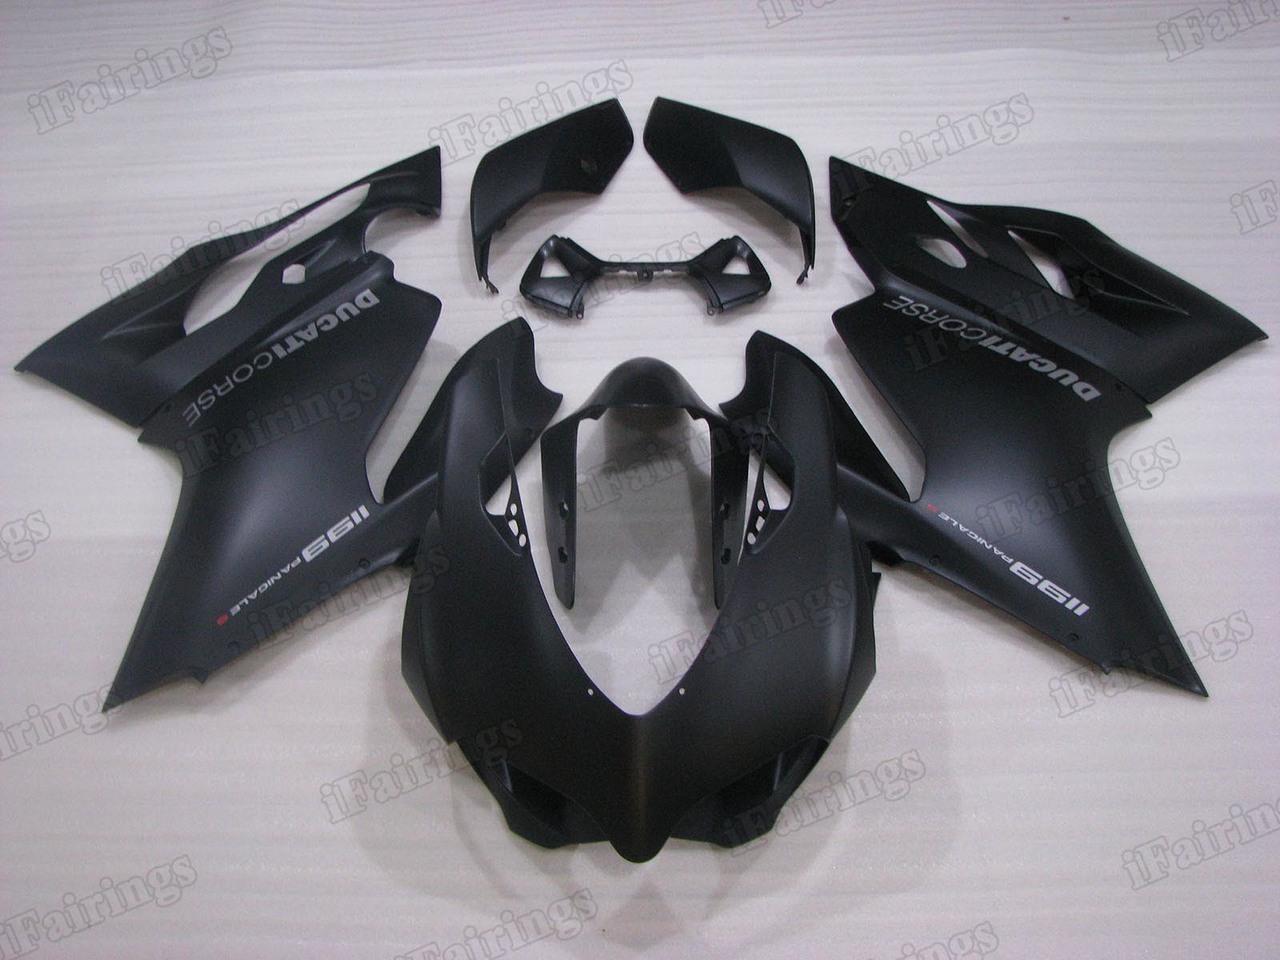 Motorcycle fairings/bodywork for Ducati 899/1199 Panigale matte black color. - Click Image to Close